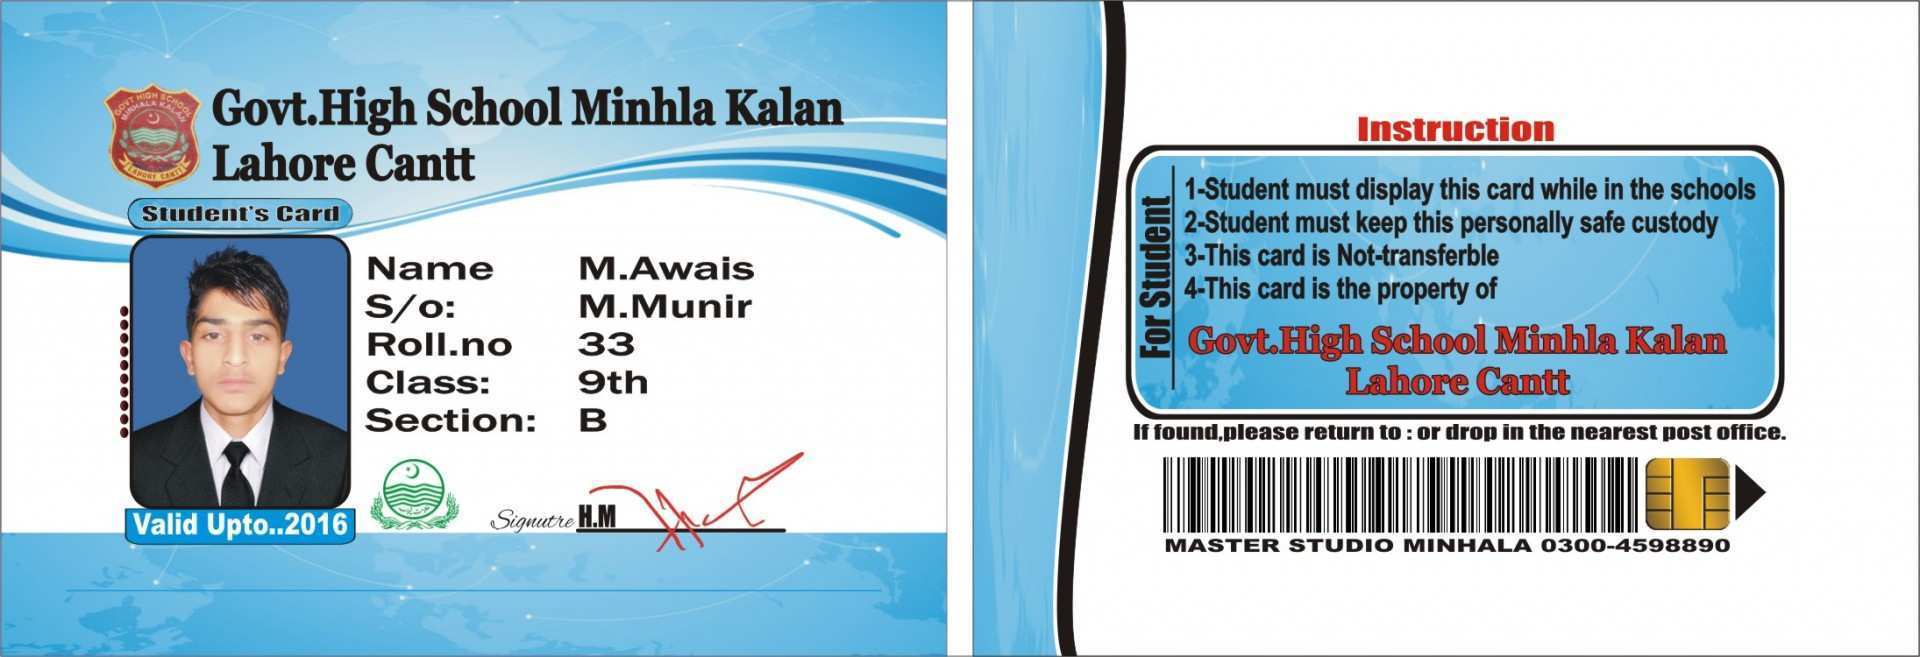 21 Blank Student Id Card Template Psd Free Download For Free for Inside College Id Card Template Psd